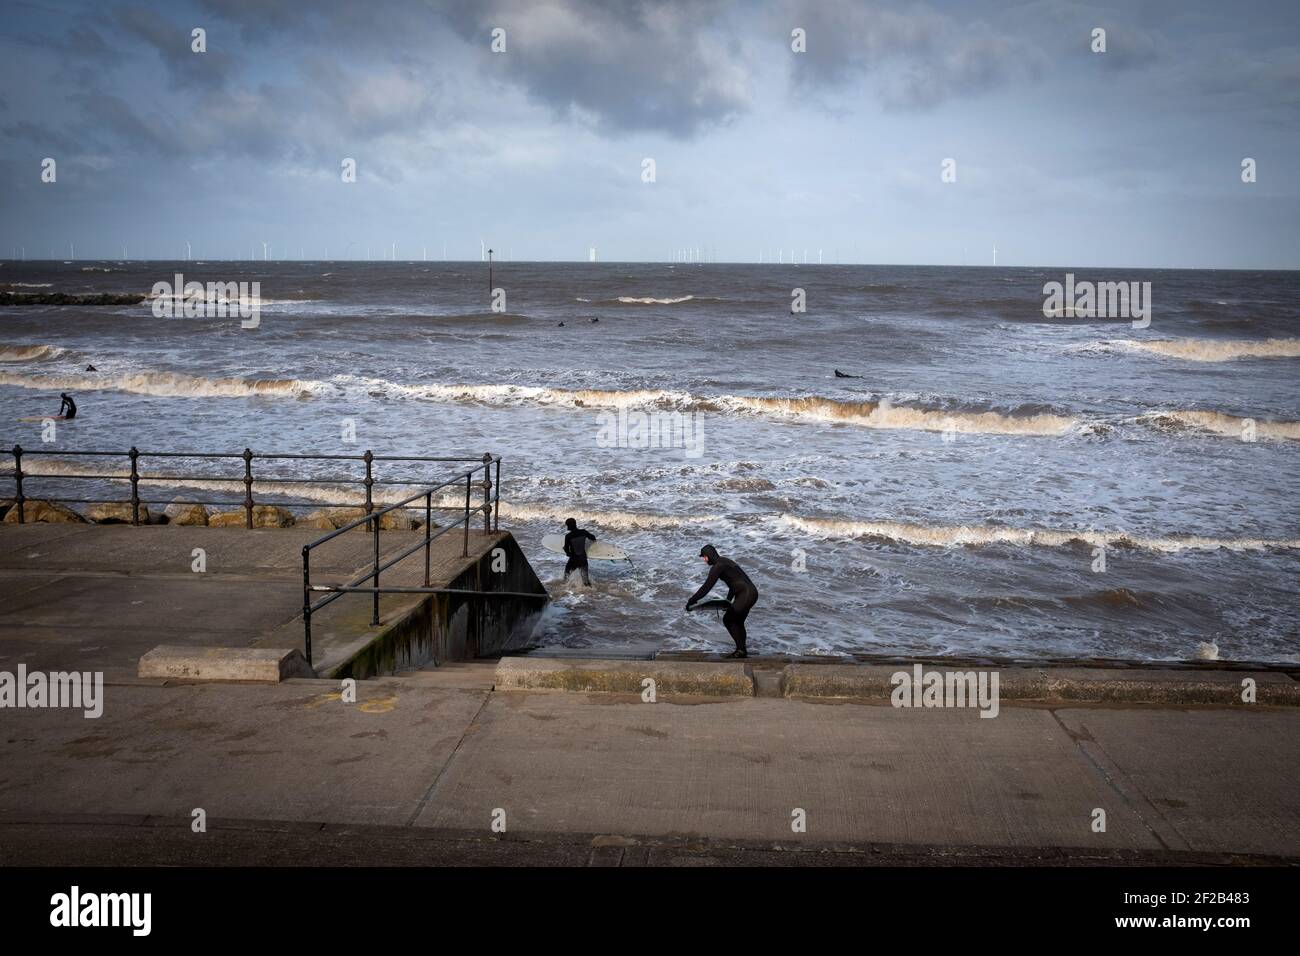 Two surfers walking towards the sea in the mouth of the river Mersey. High tides and a storm which swept across the United Kingdom brought favourable conditions for surfing in Leasowe Bay, Merseyside on 11 March, 2021. Stock Photo